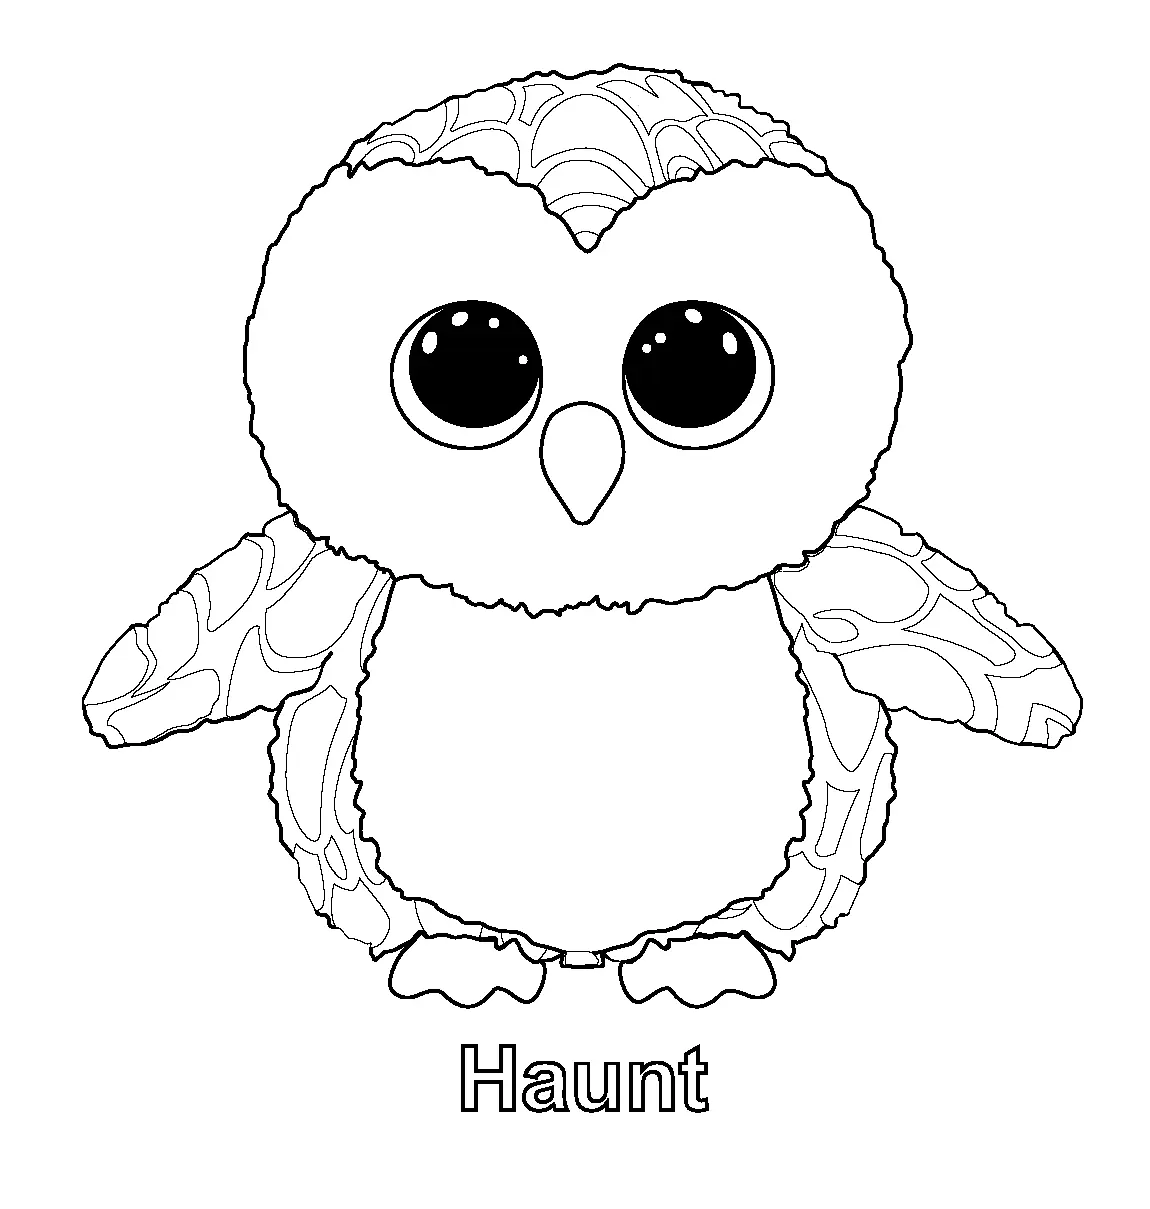 Beanie Boos Coloring Pages